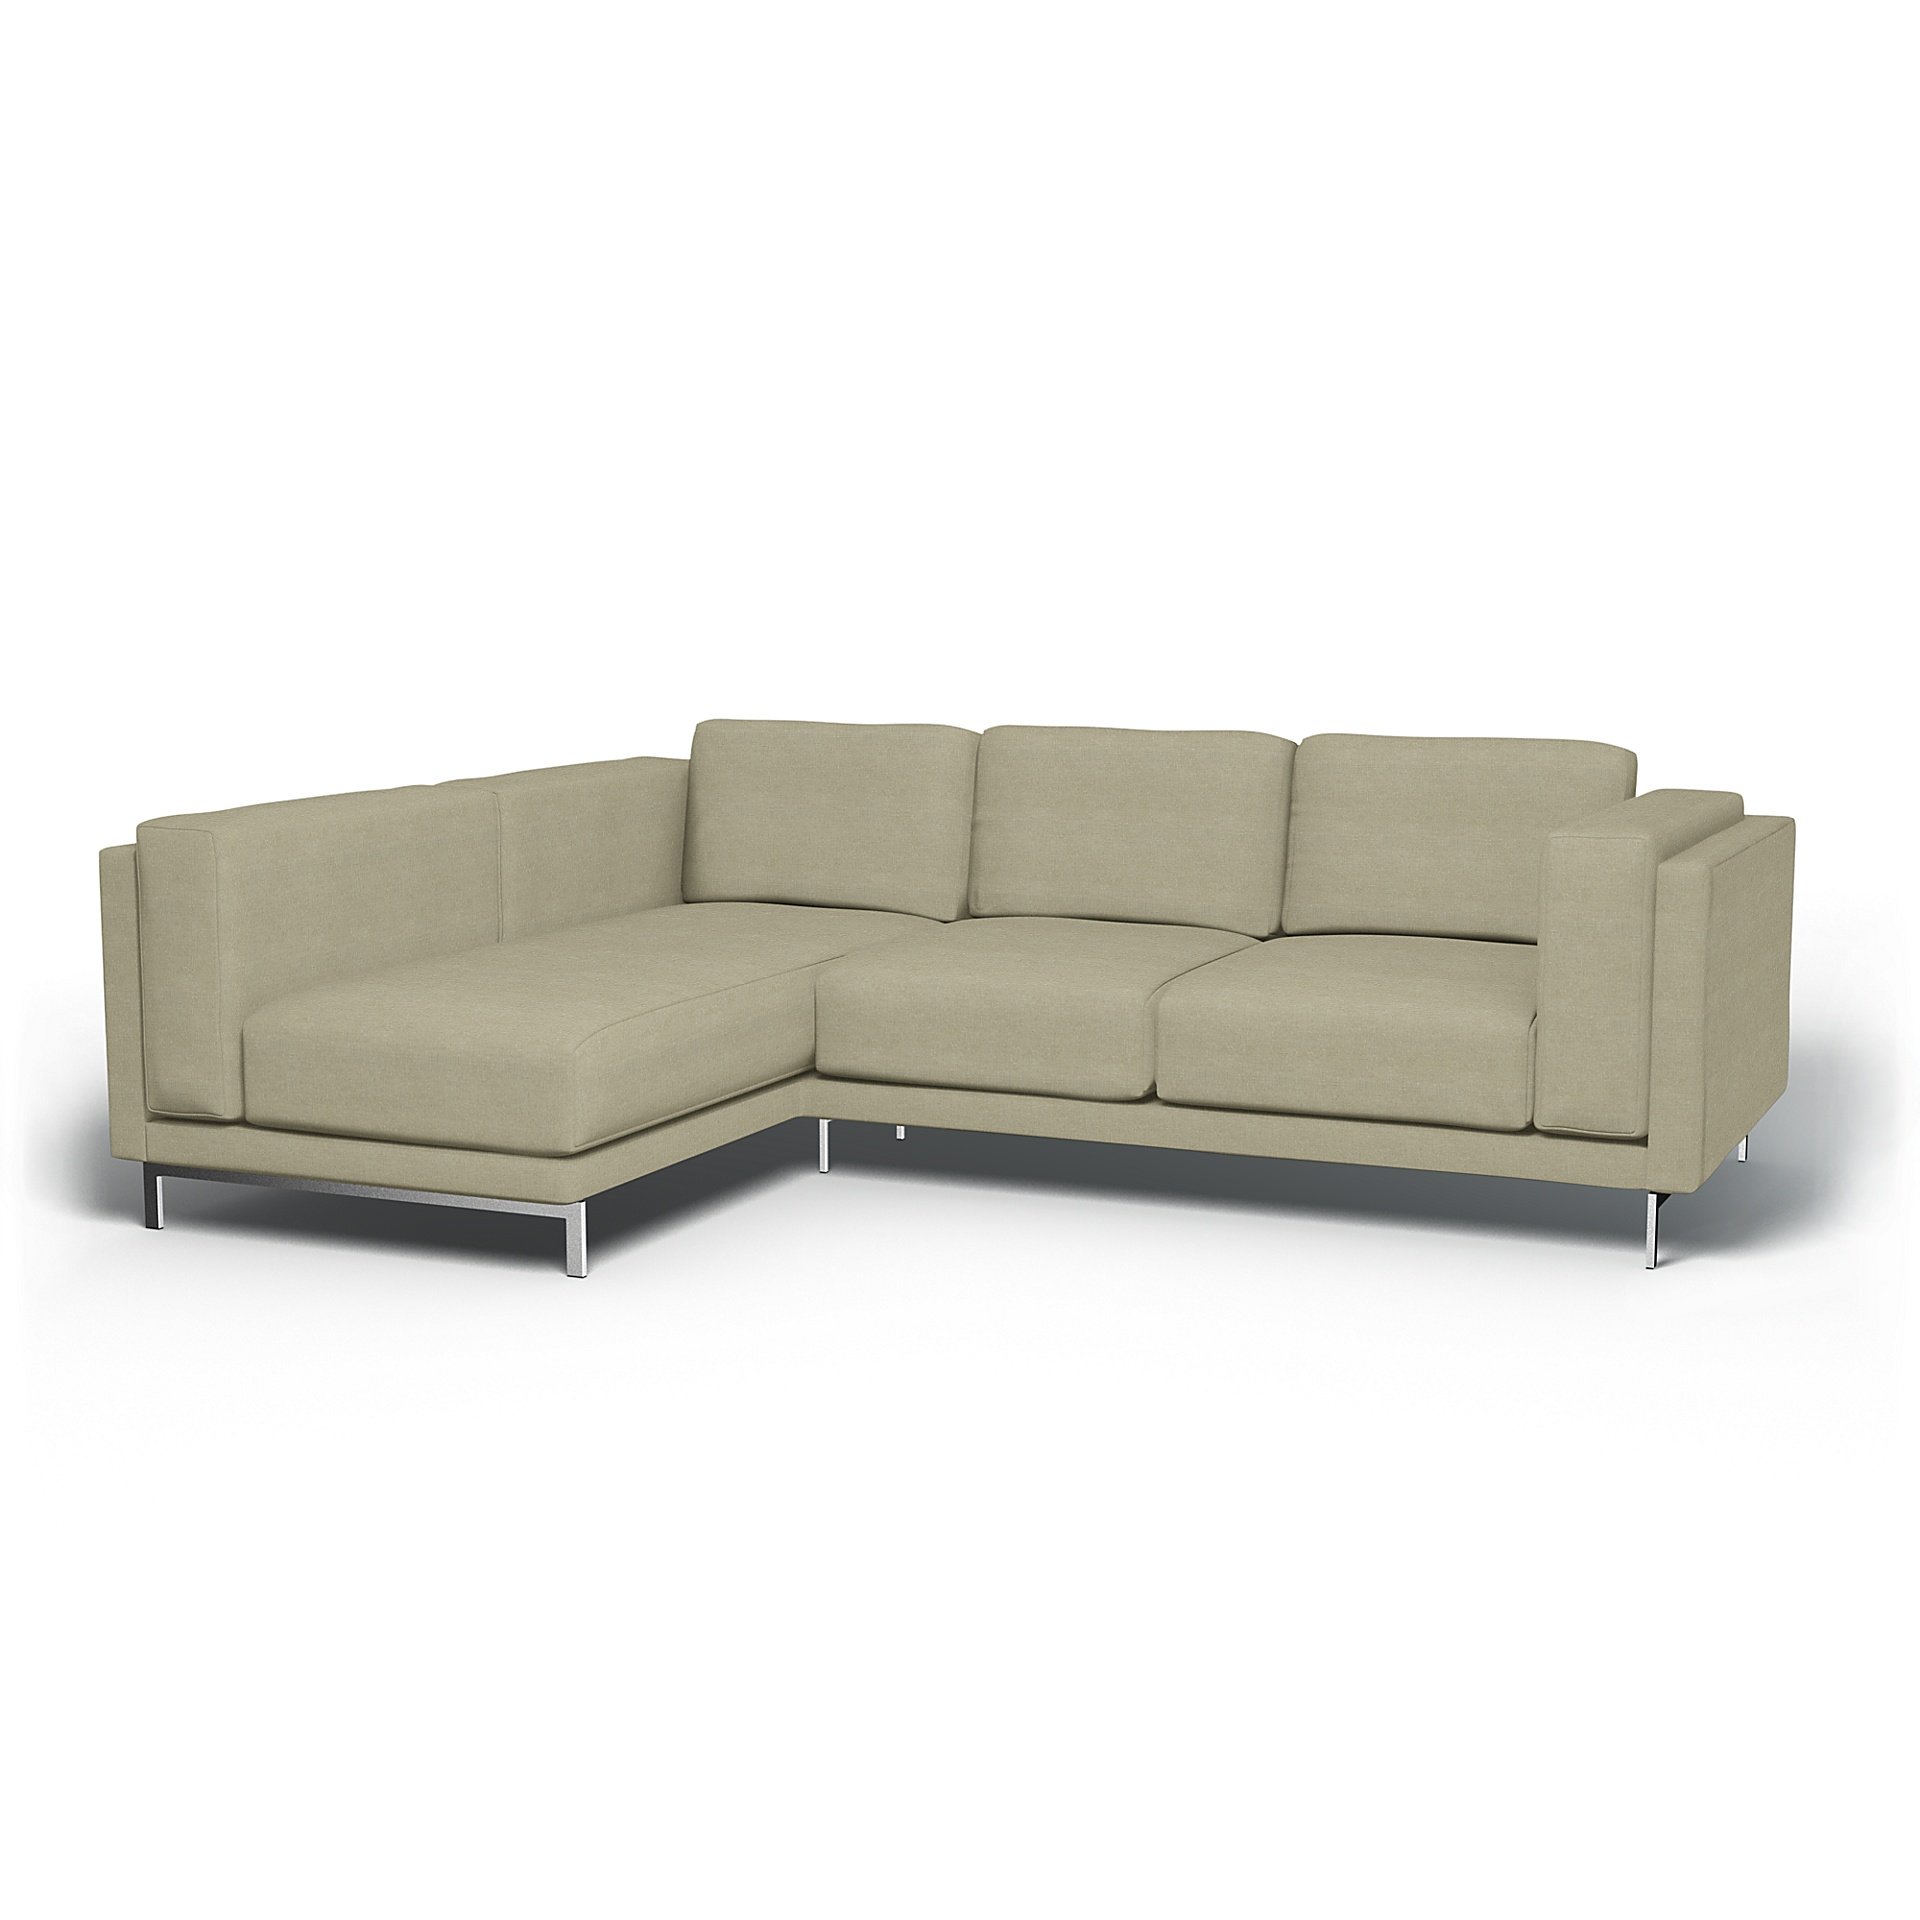 IKEA - Nockeby 3 Seater Sofa with Left Chaise Cover, Pebble, Linen - Bemz